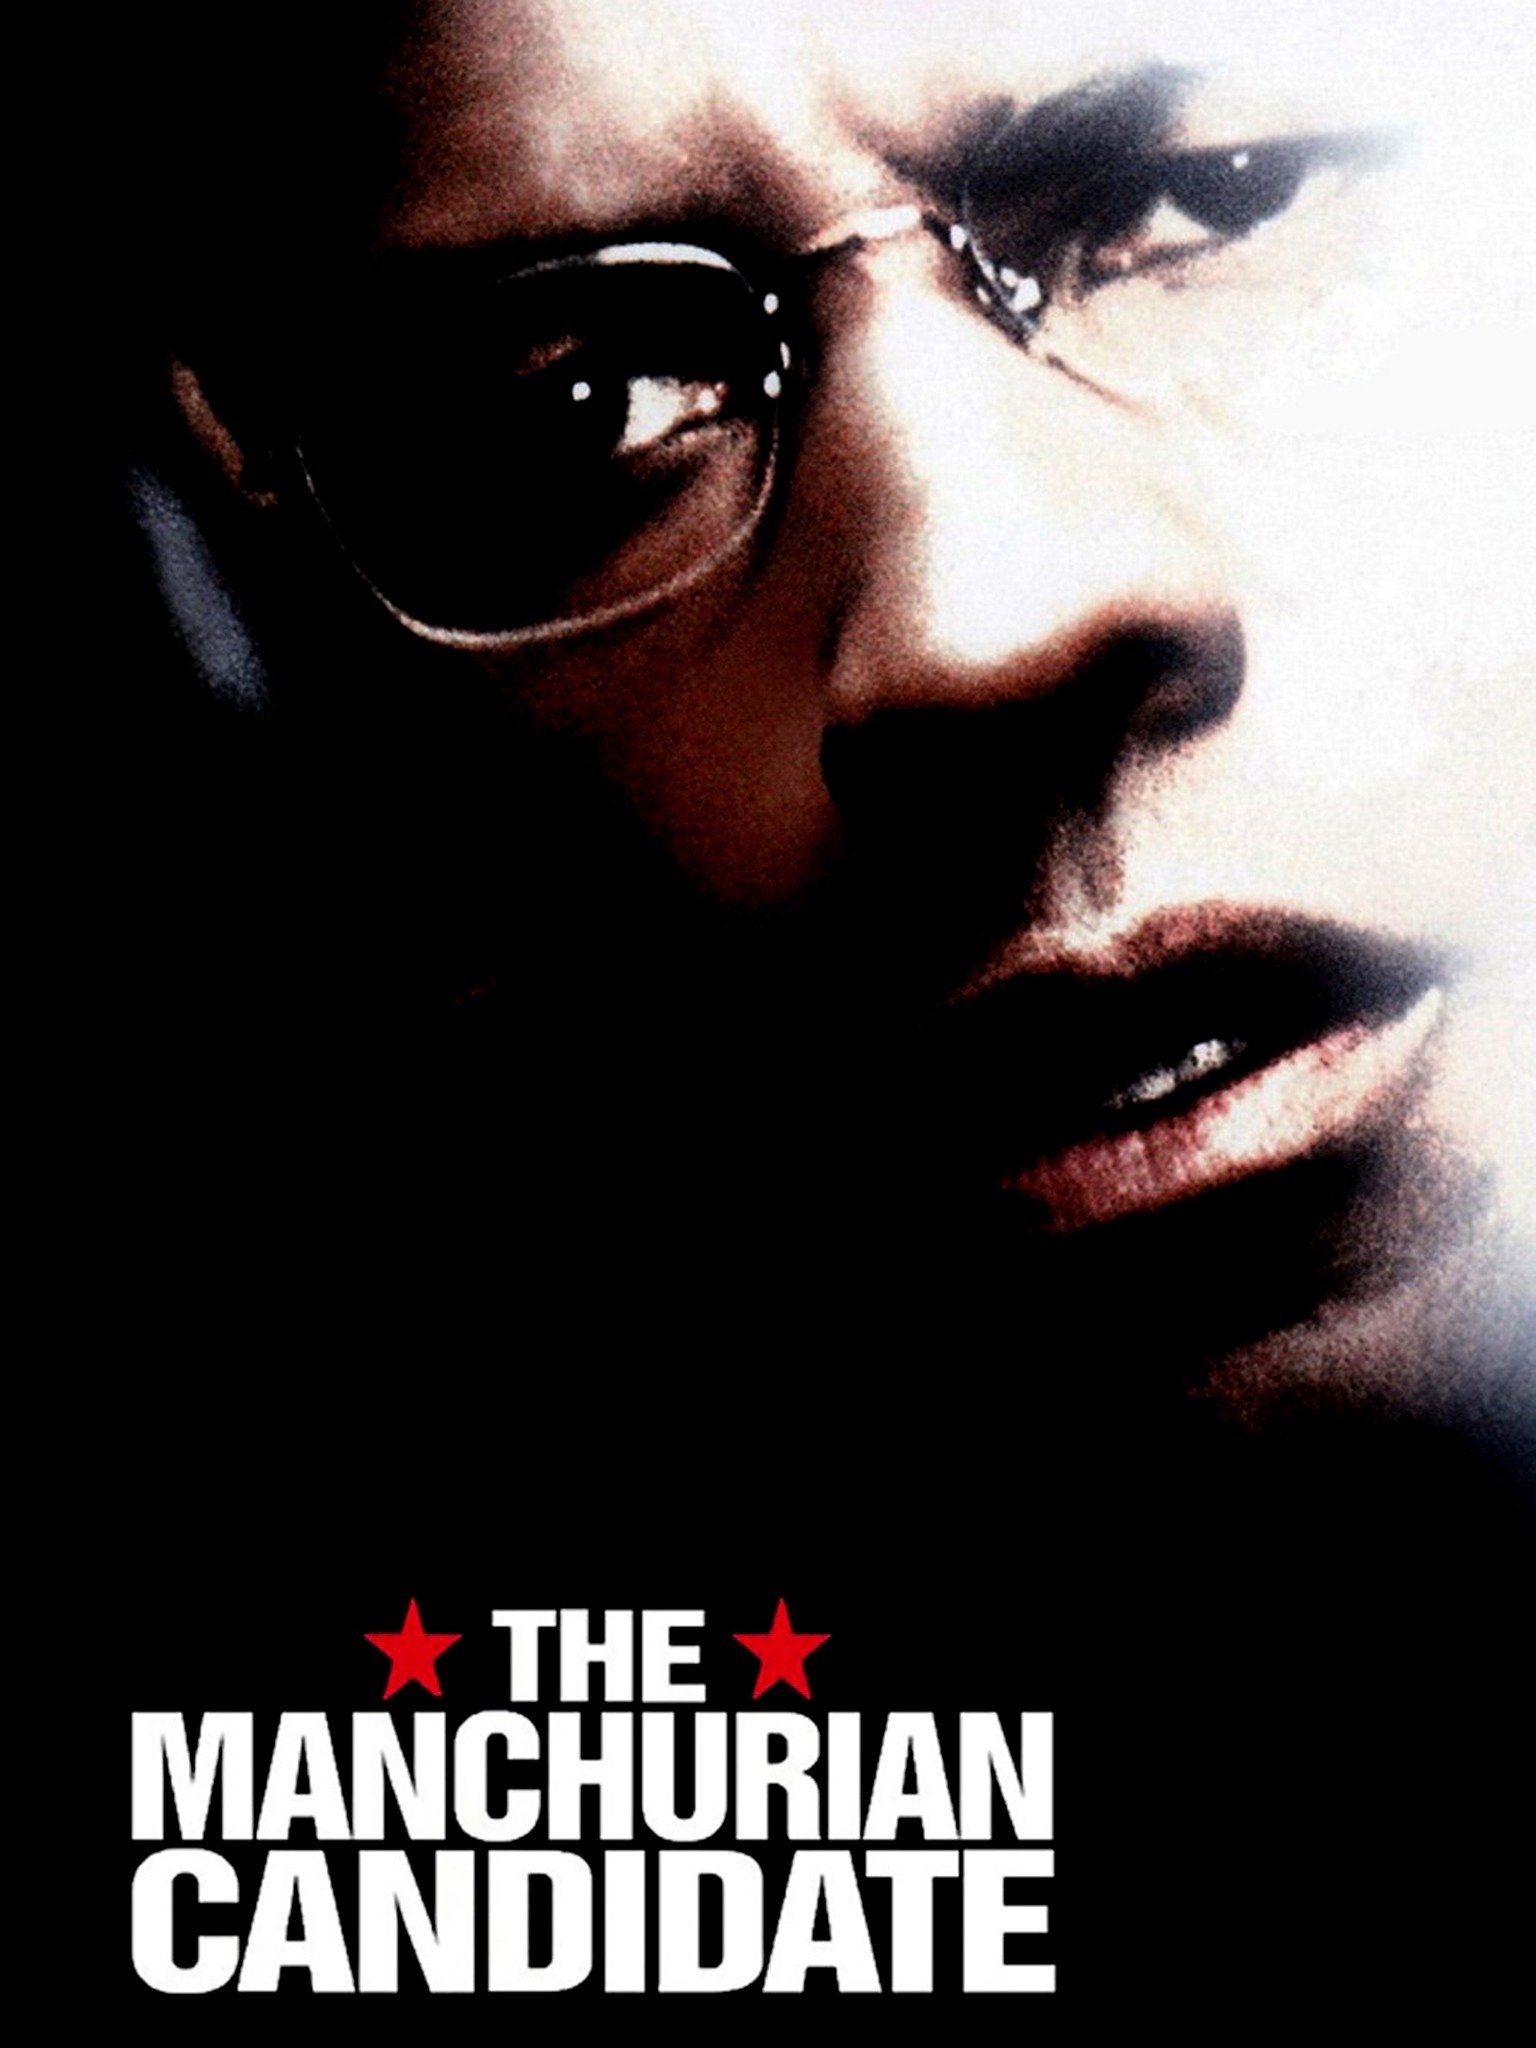 the manchurian candidate movie review